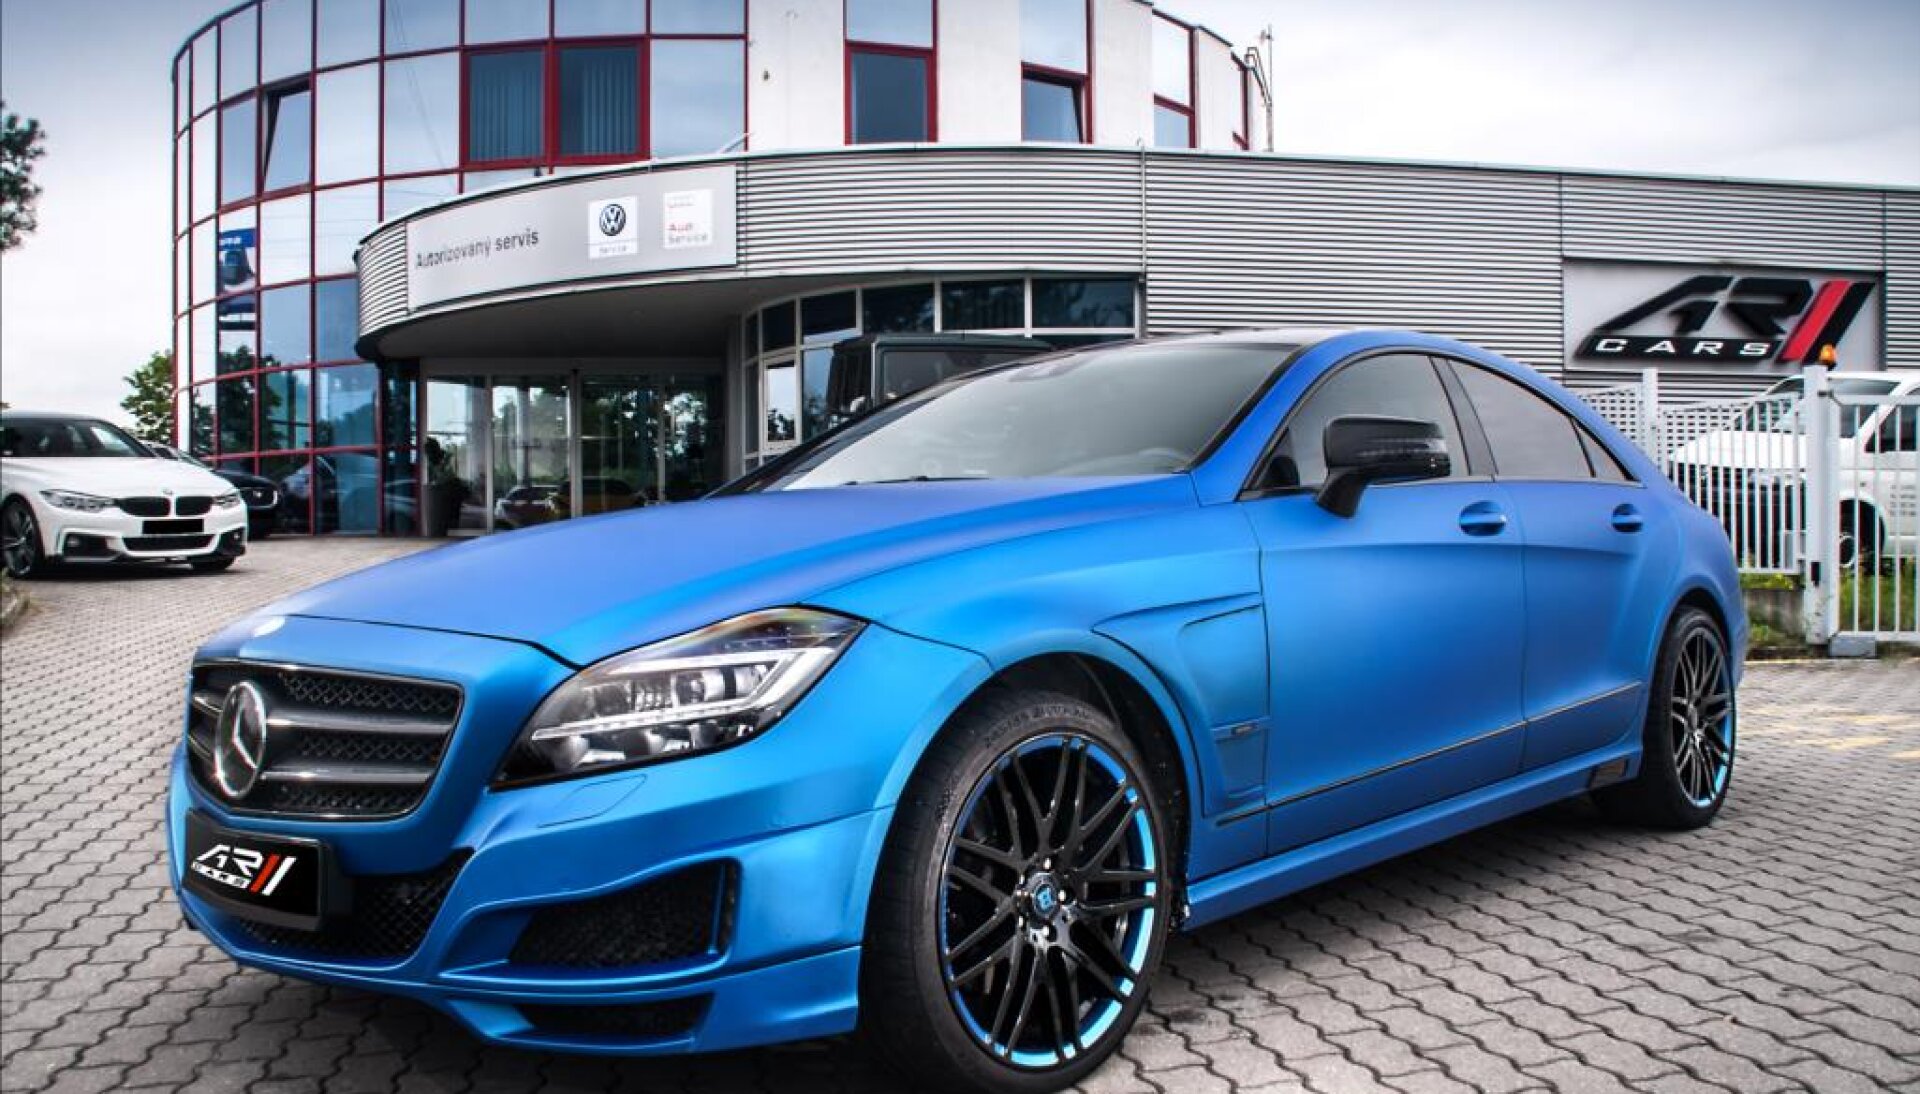 Mercedes-Benz CLS 350 CDI 4-Airmatic, Brabus styling,LED,Individual